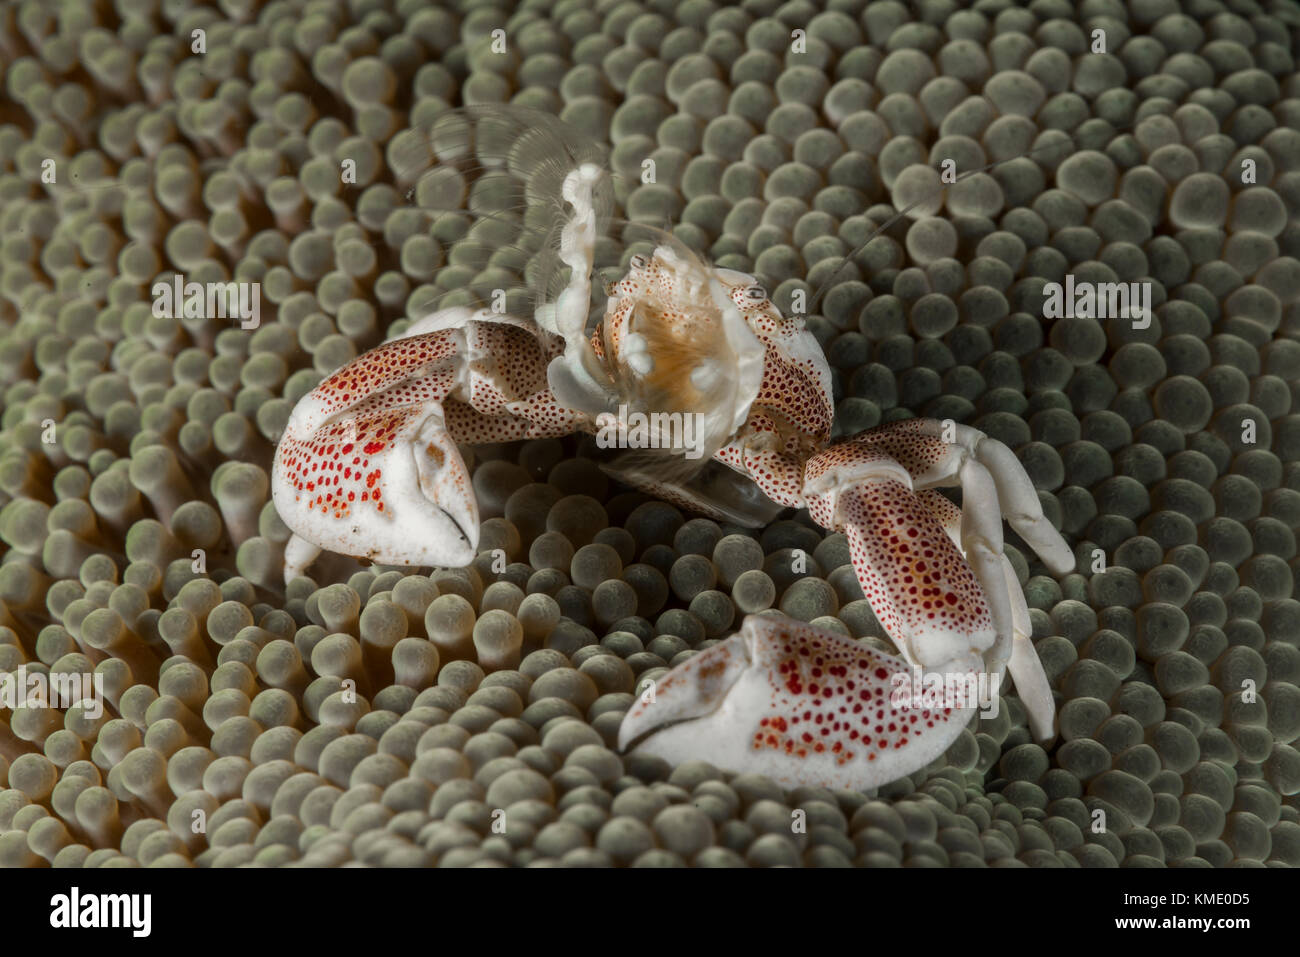 Porcelain crab on a sea anemone Stock Photo